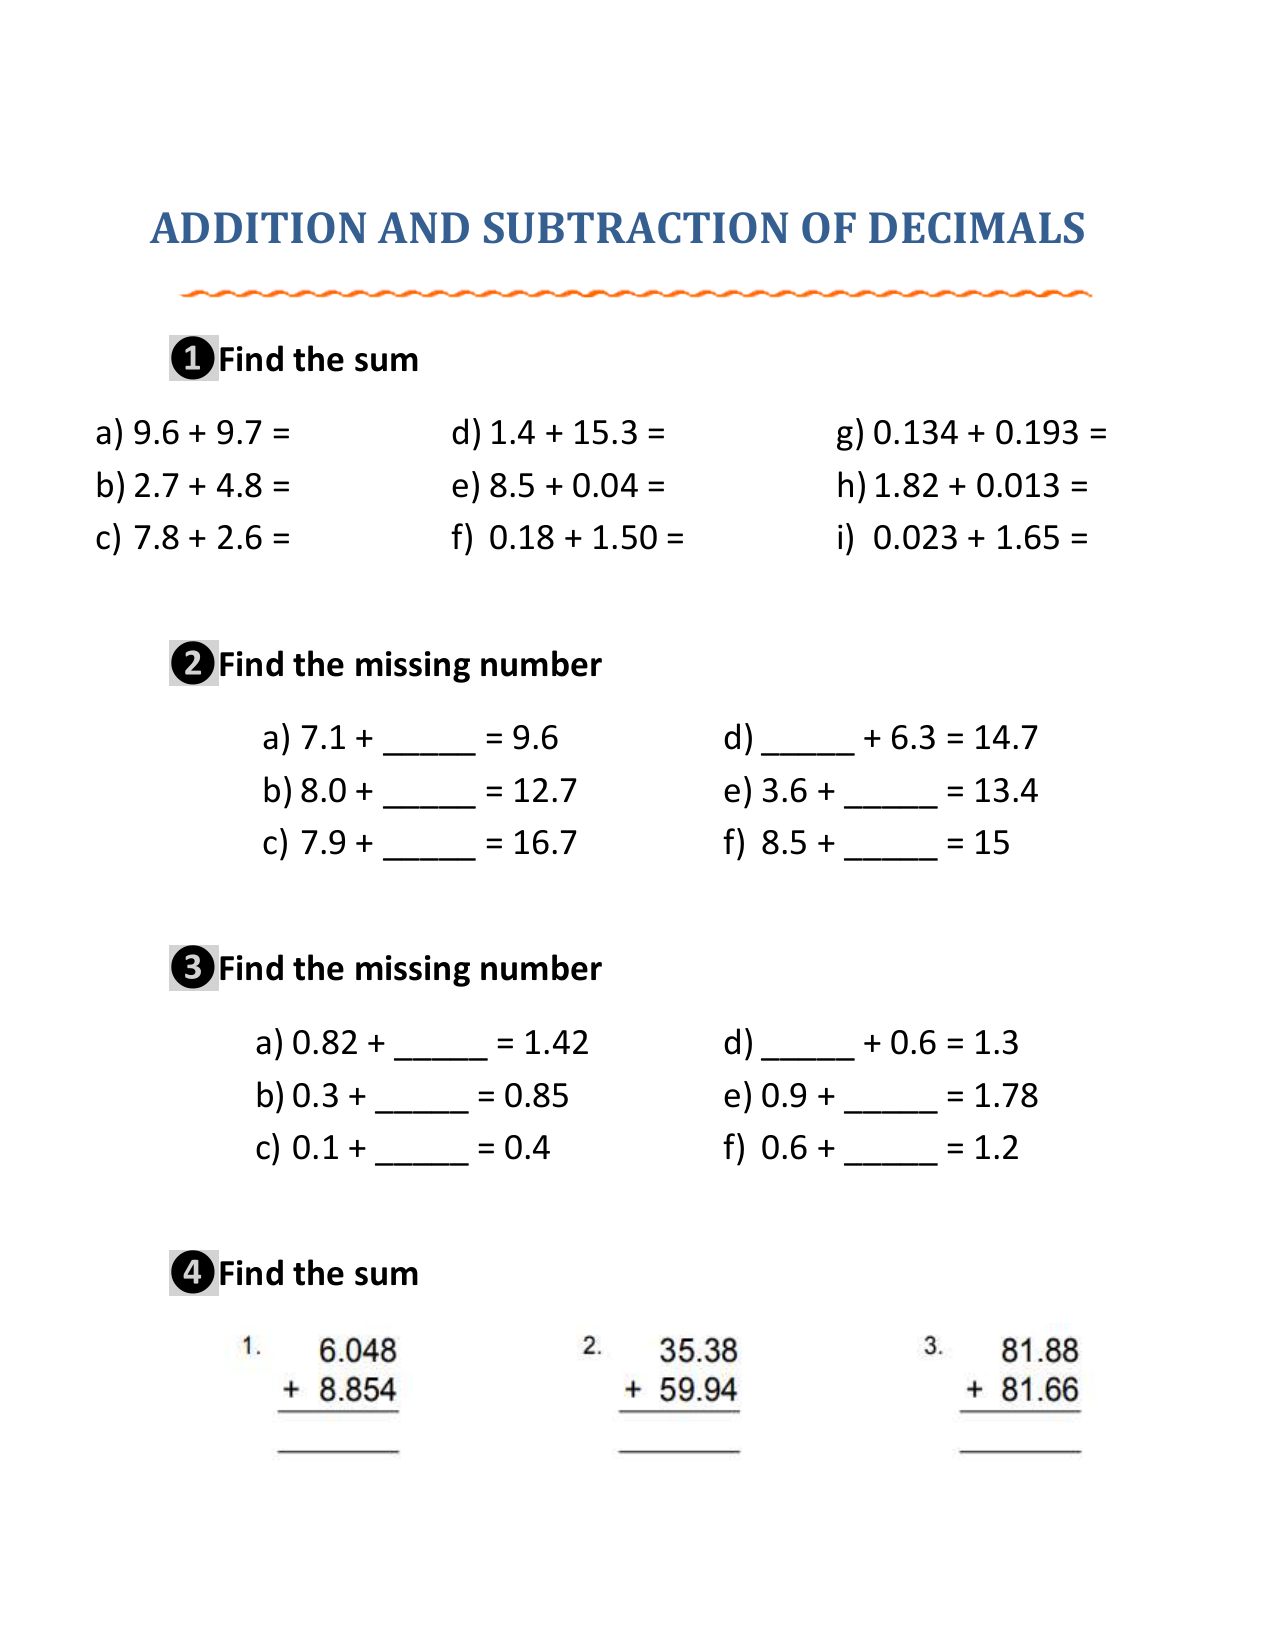 multiply-and-divide-decimals-mr-piper-clayburn-middle-school-2023-24